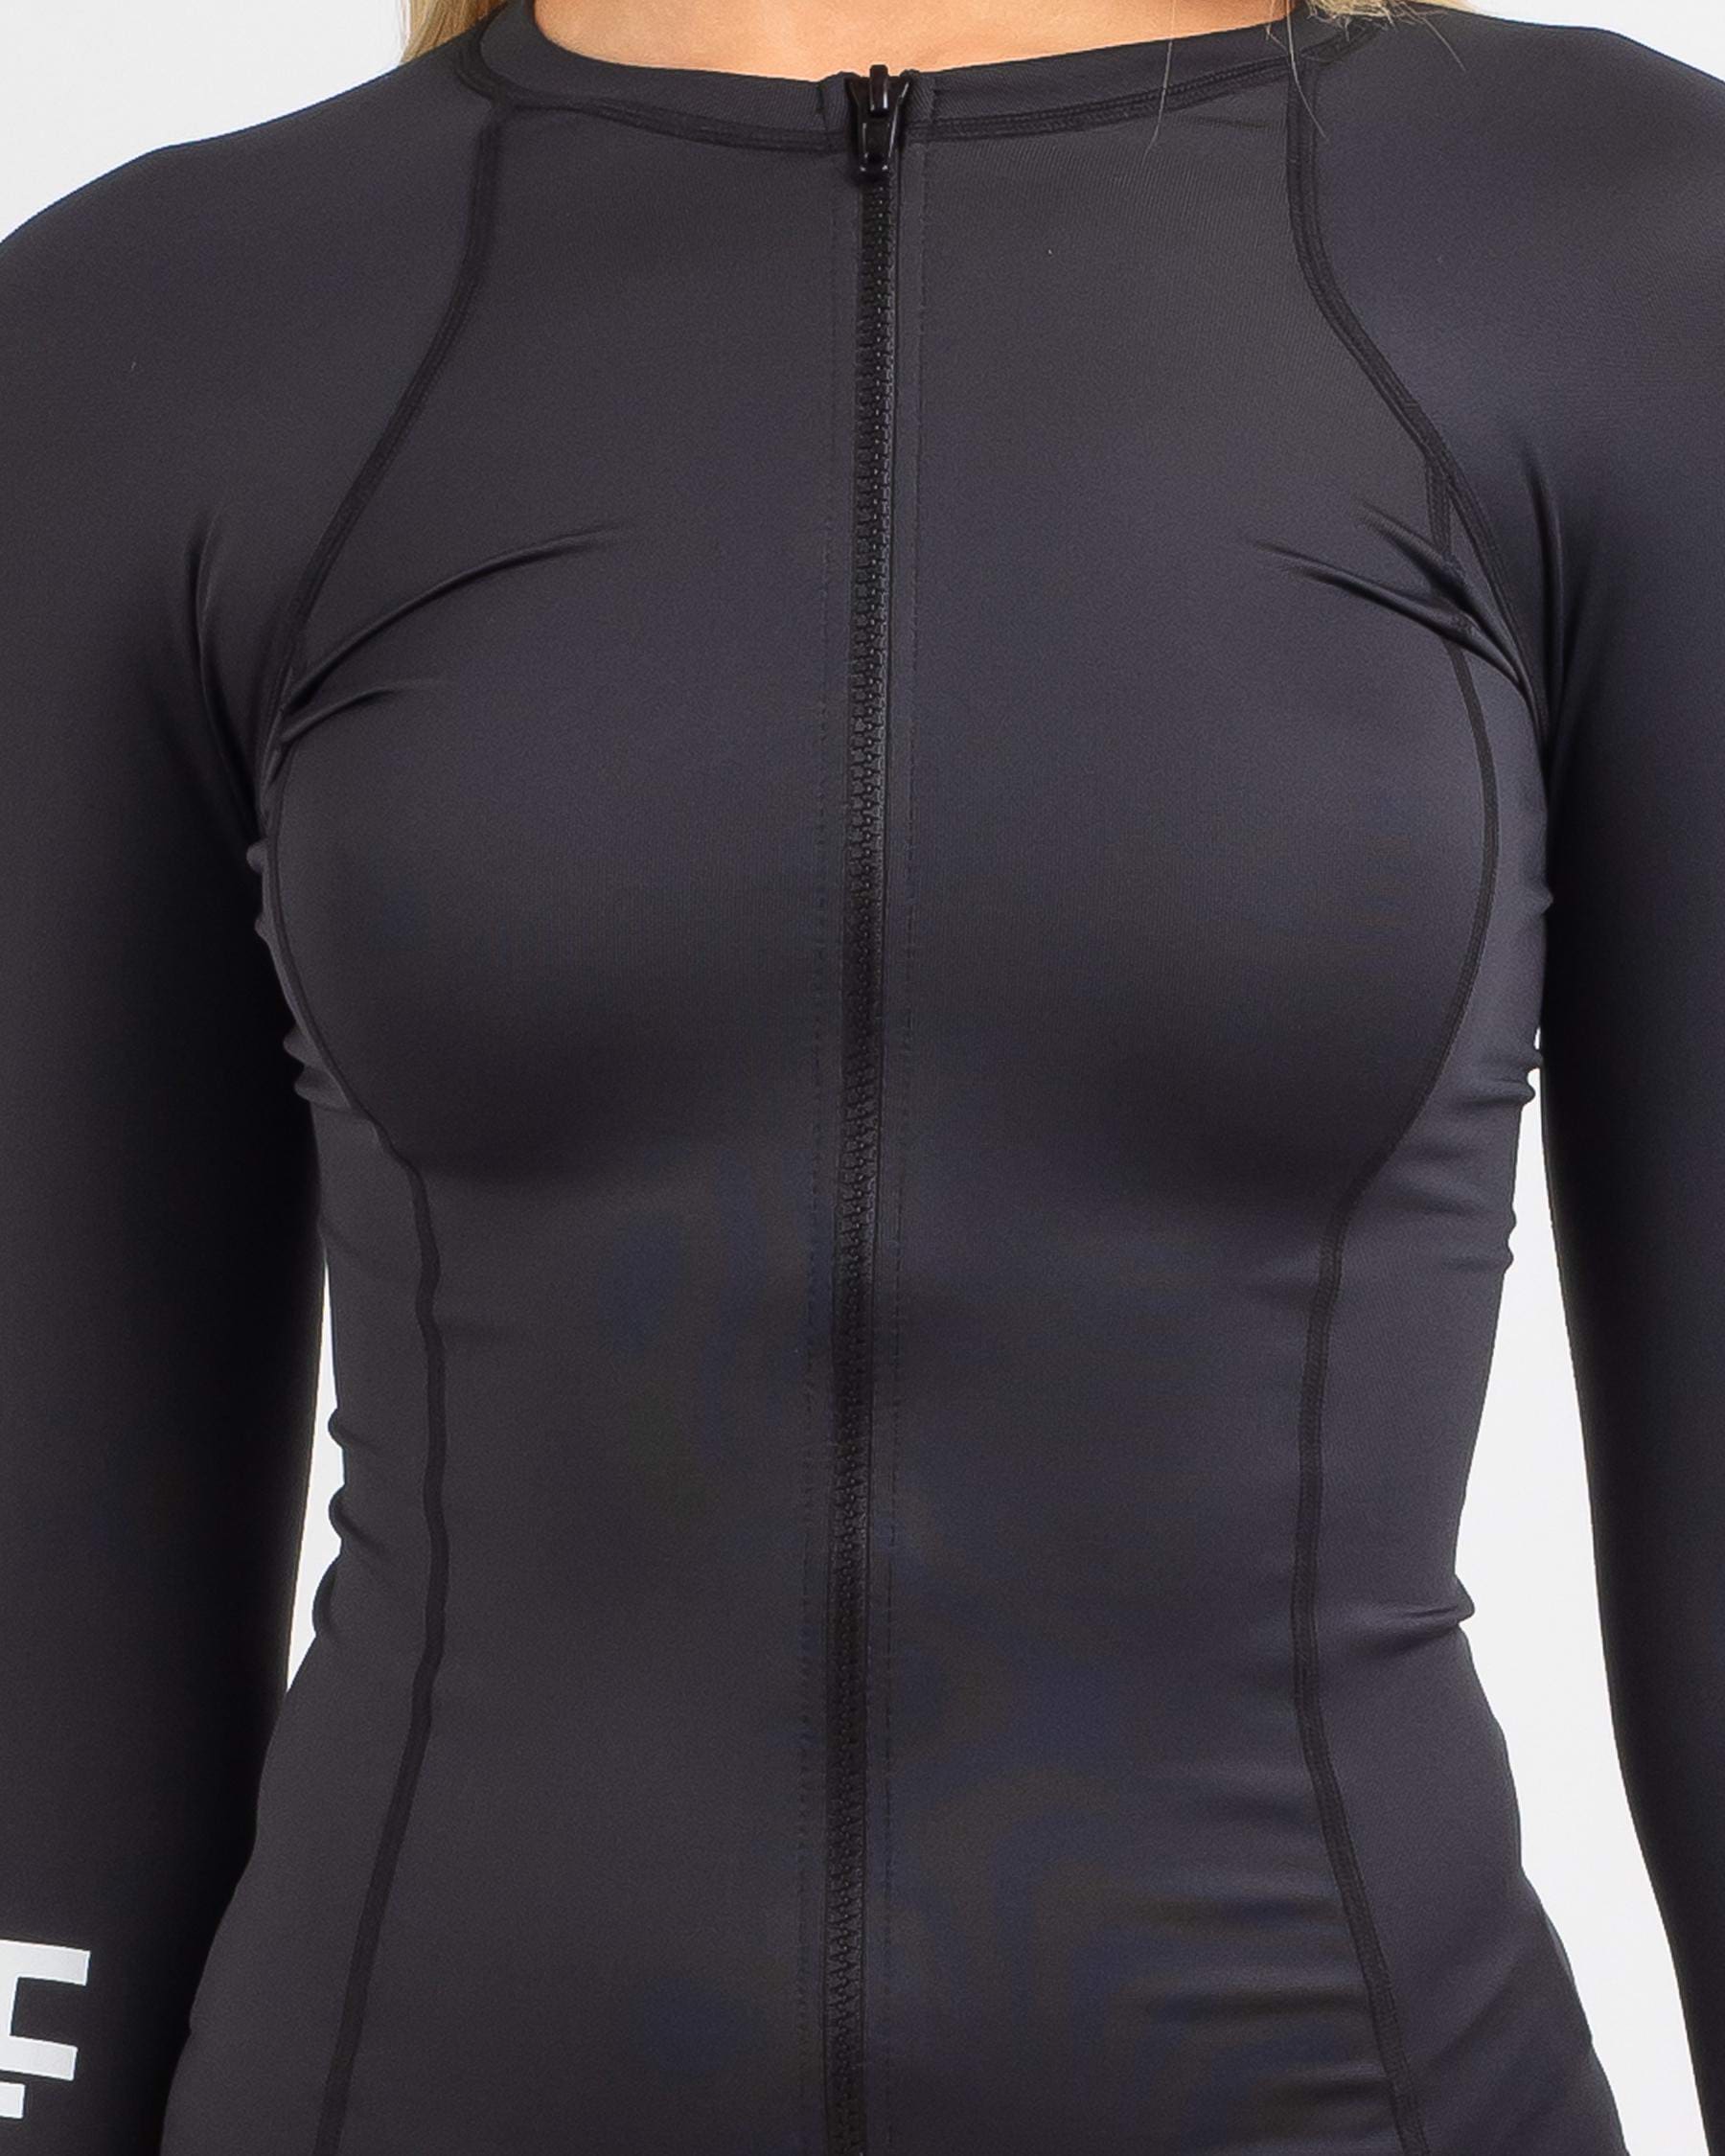 Hurley One And Only Long Sleeve Zip Rash Vest In Black - Fast Shipping ...